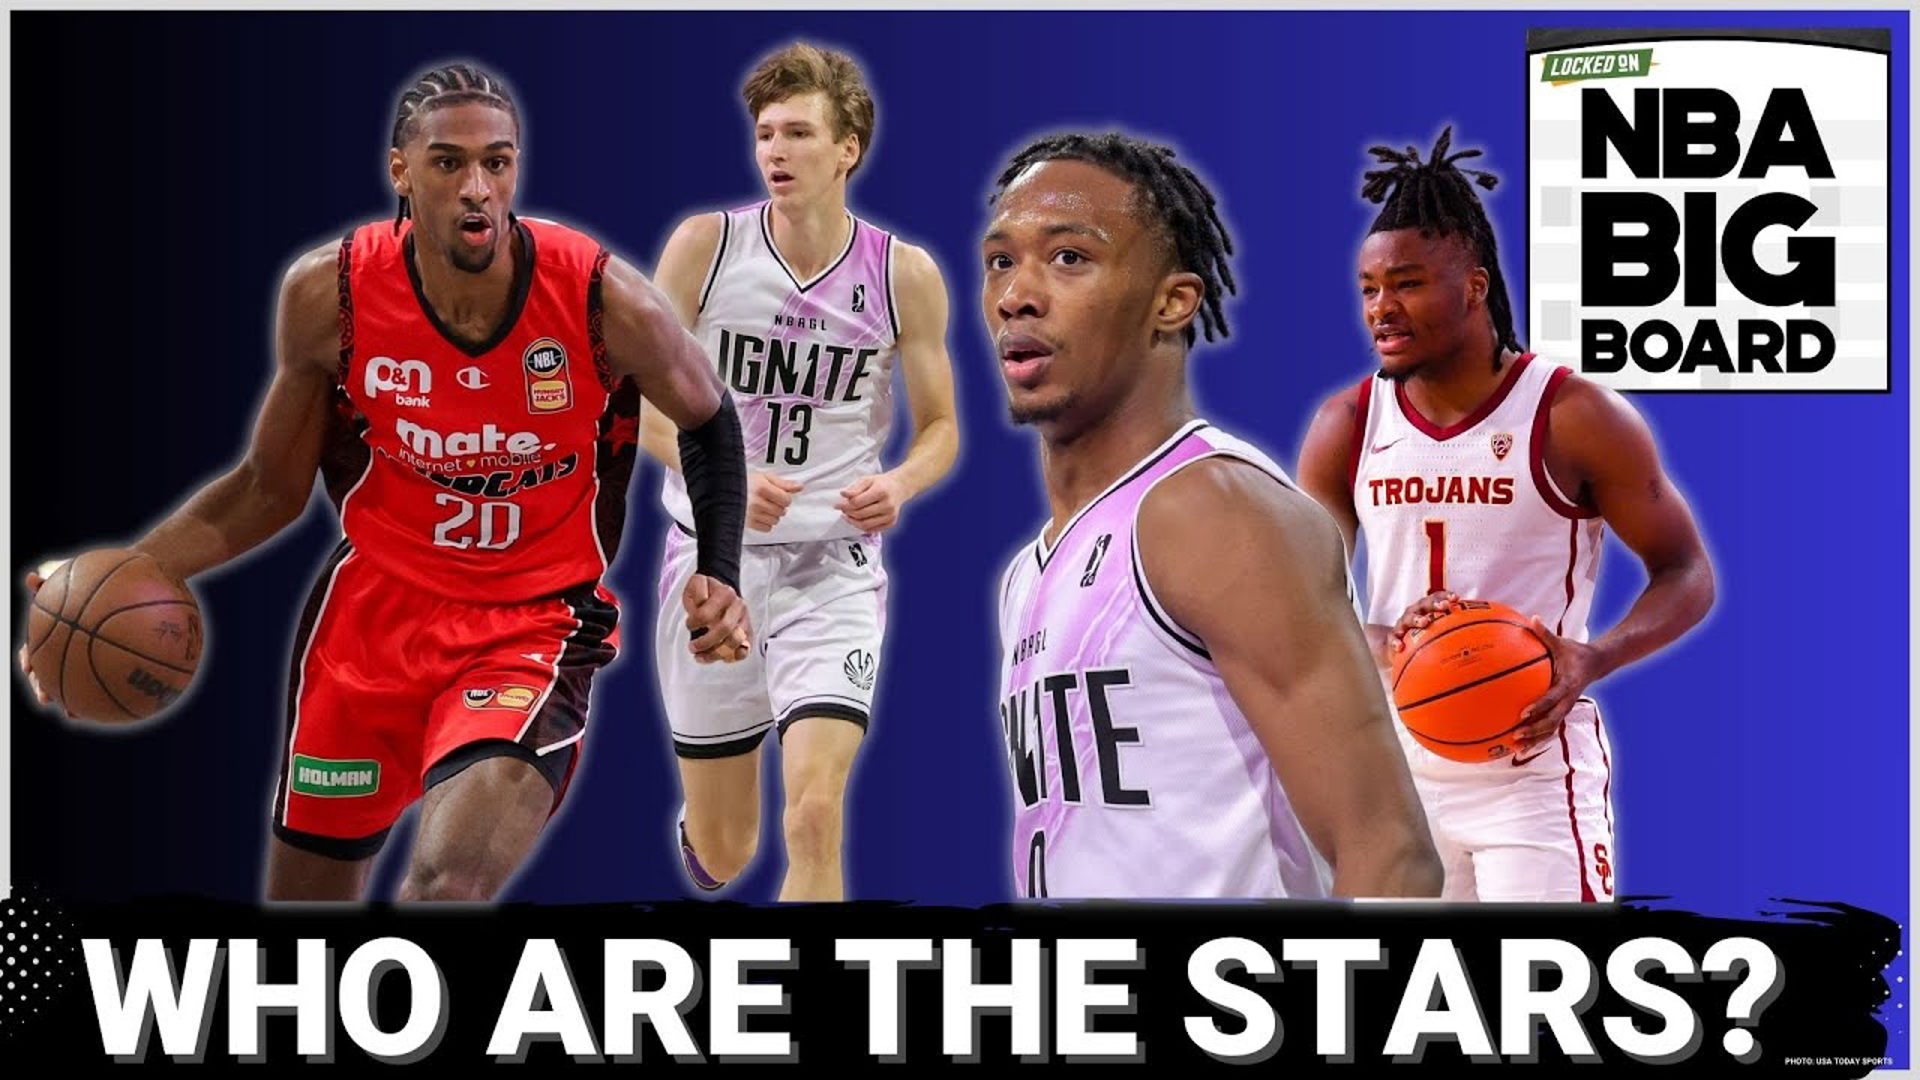 Leif Thulin and Richard Stayman discuss who has the highest ceiling in this draft class and which players have the most likelihood to become All-stars.